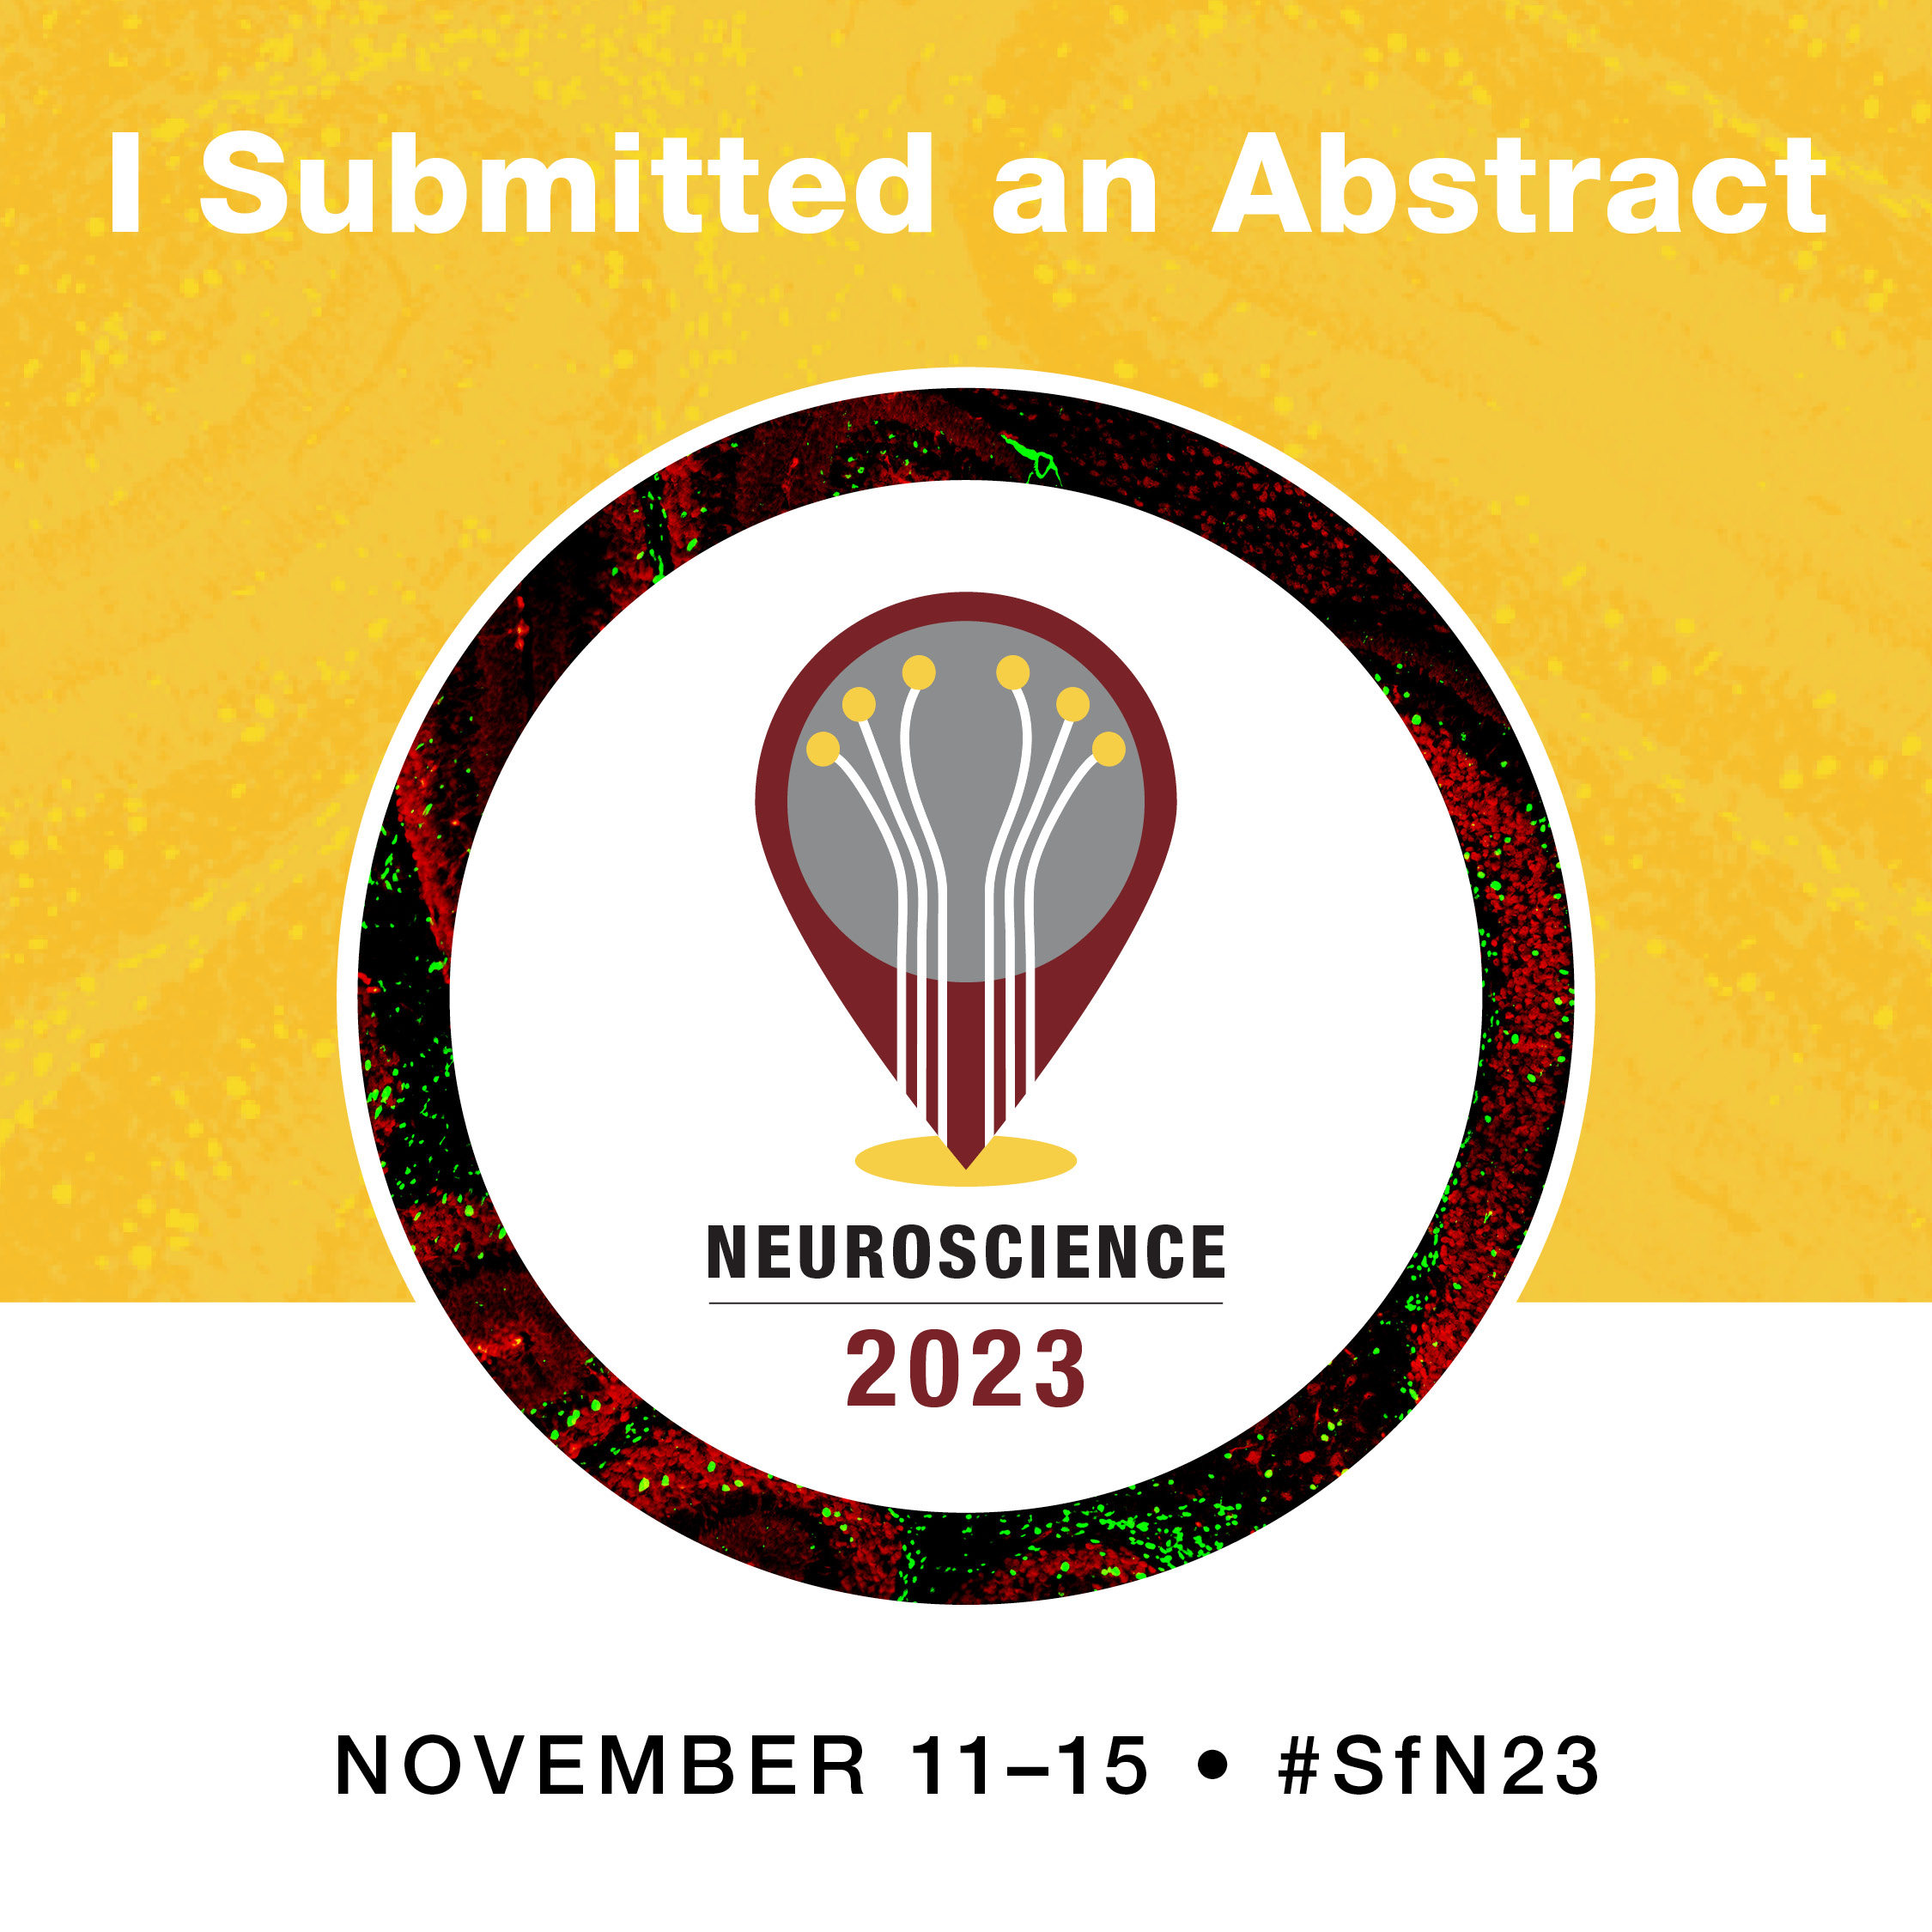 Image that says "I submitted an abstract" with the Neuroscience 2023 logo.